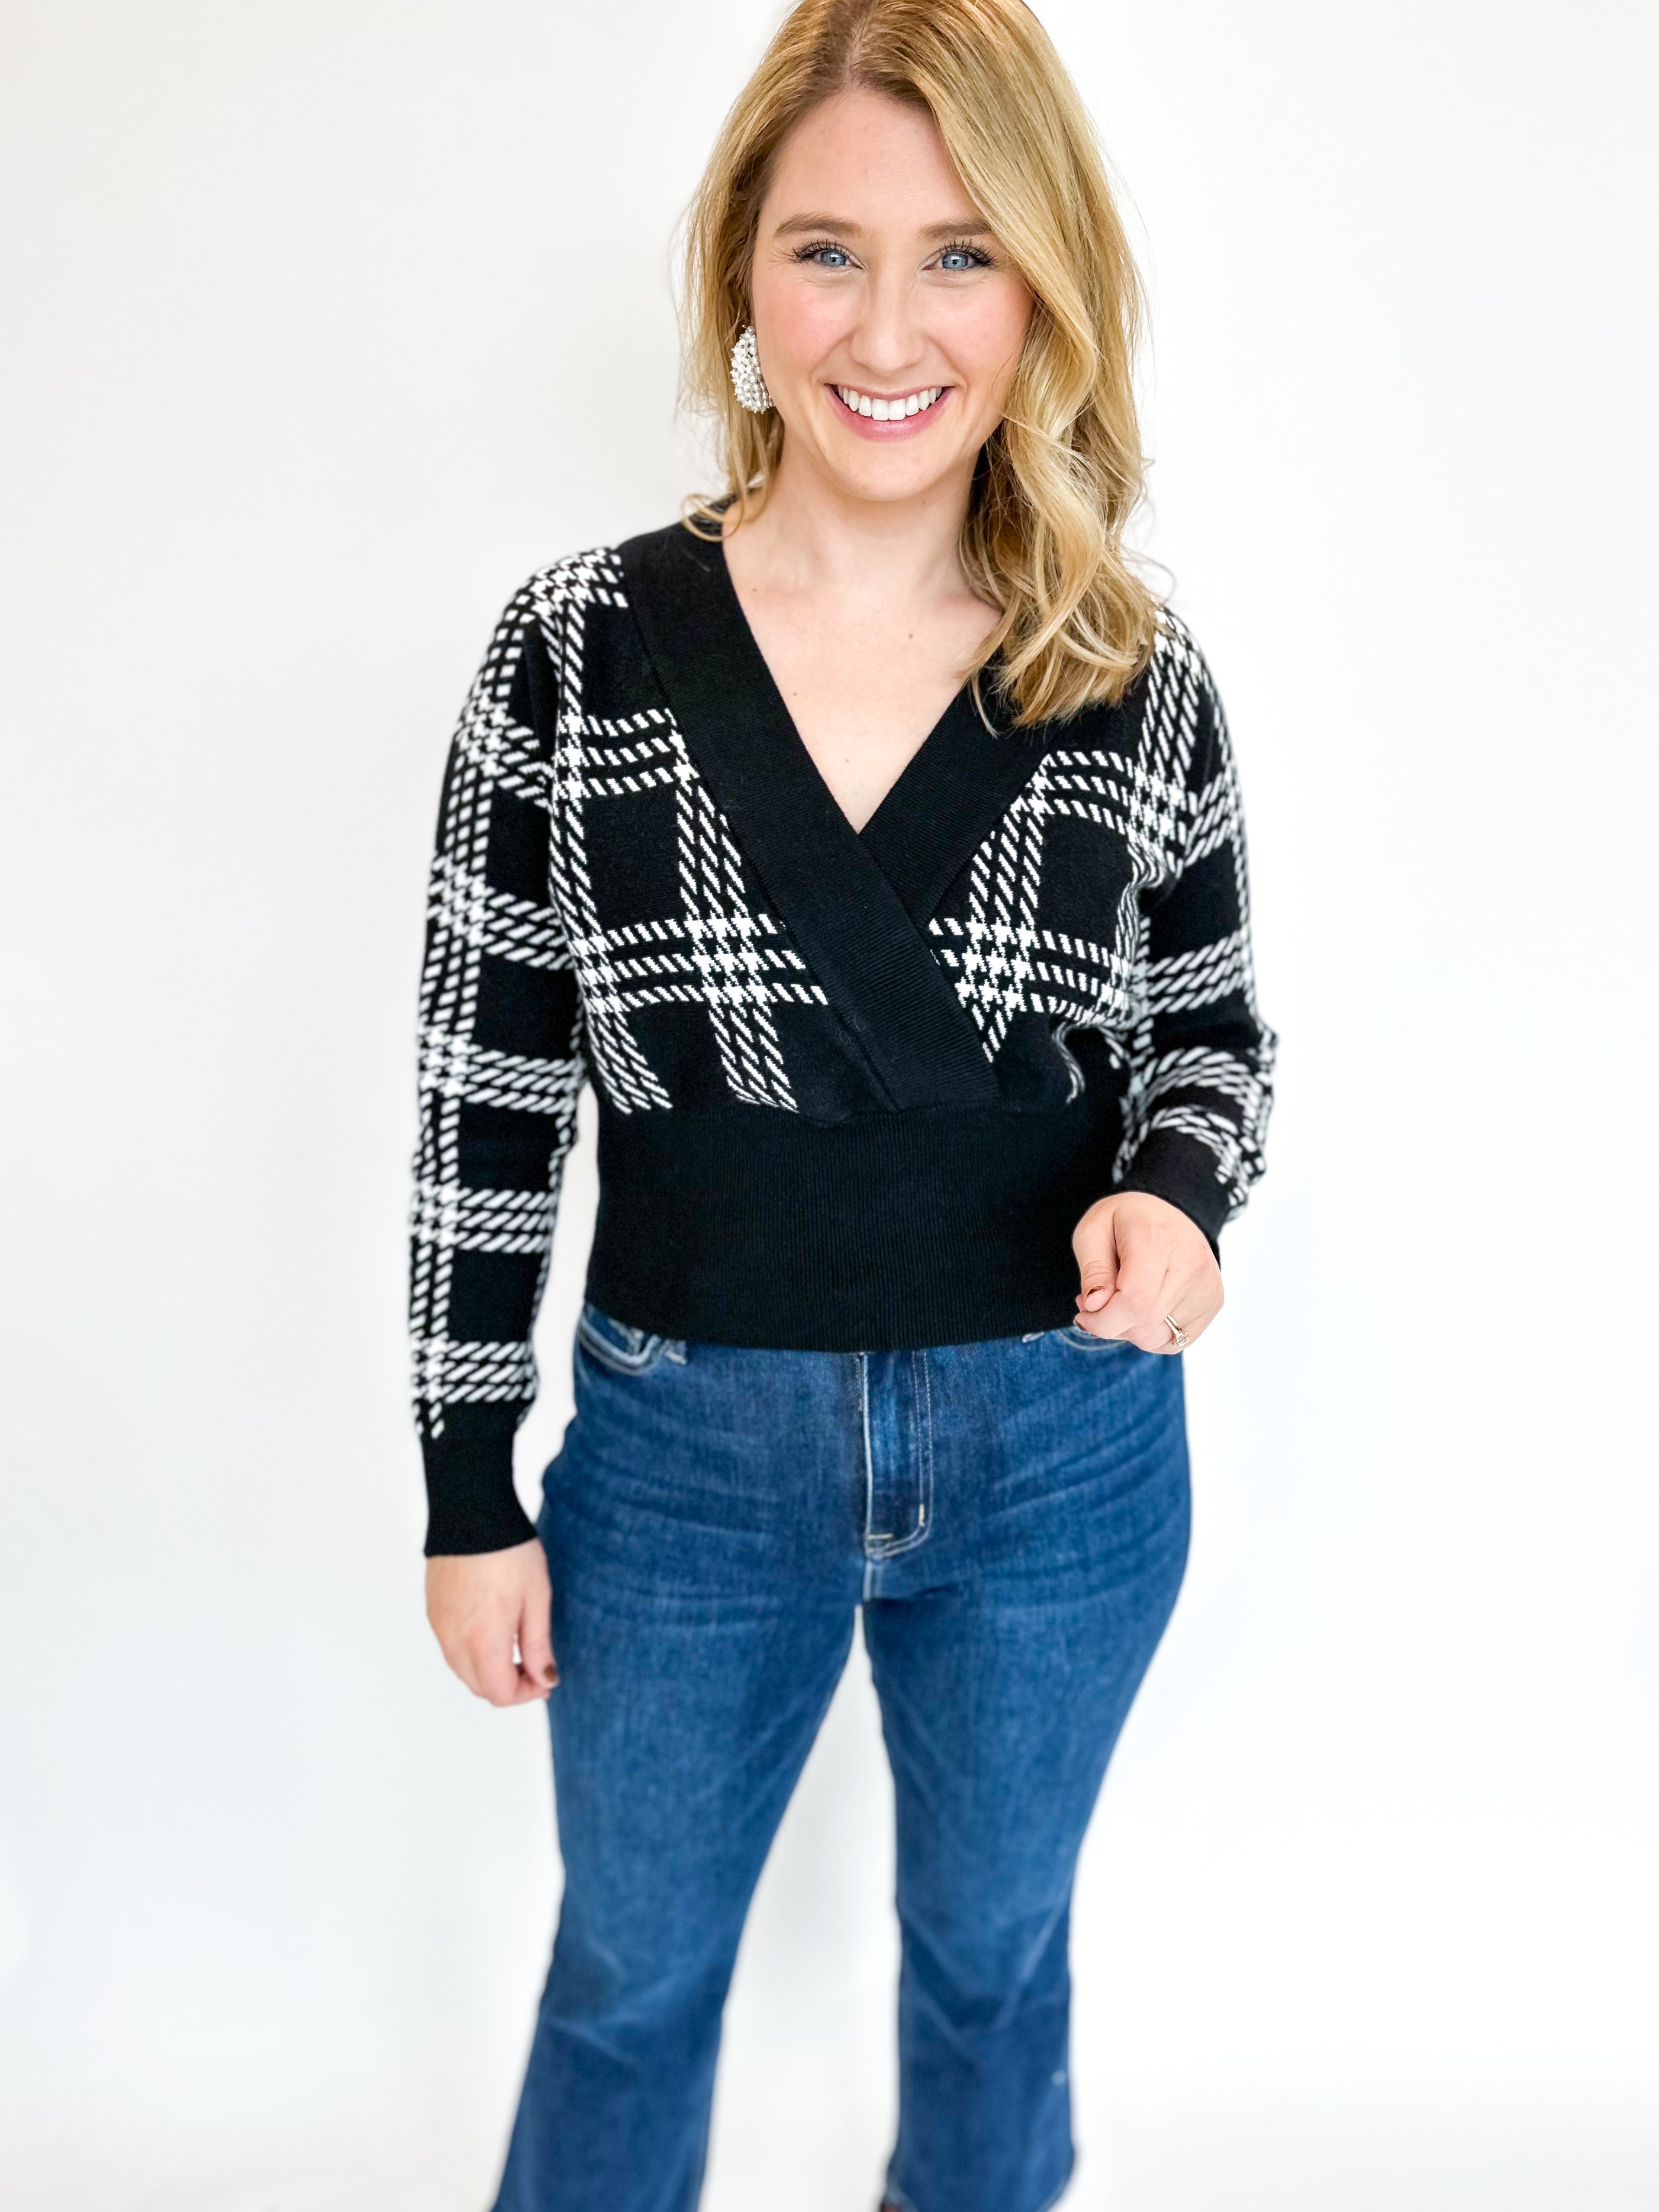 Gather Black & White Sweater-230 Sweaters/Cardis-ALLIE ROSE-July & June Women's Fashion Boutique Located in San Antonio, Texas